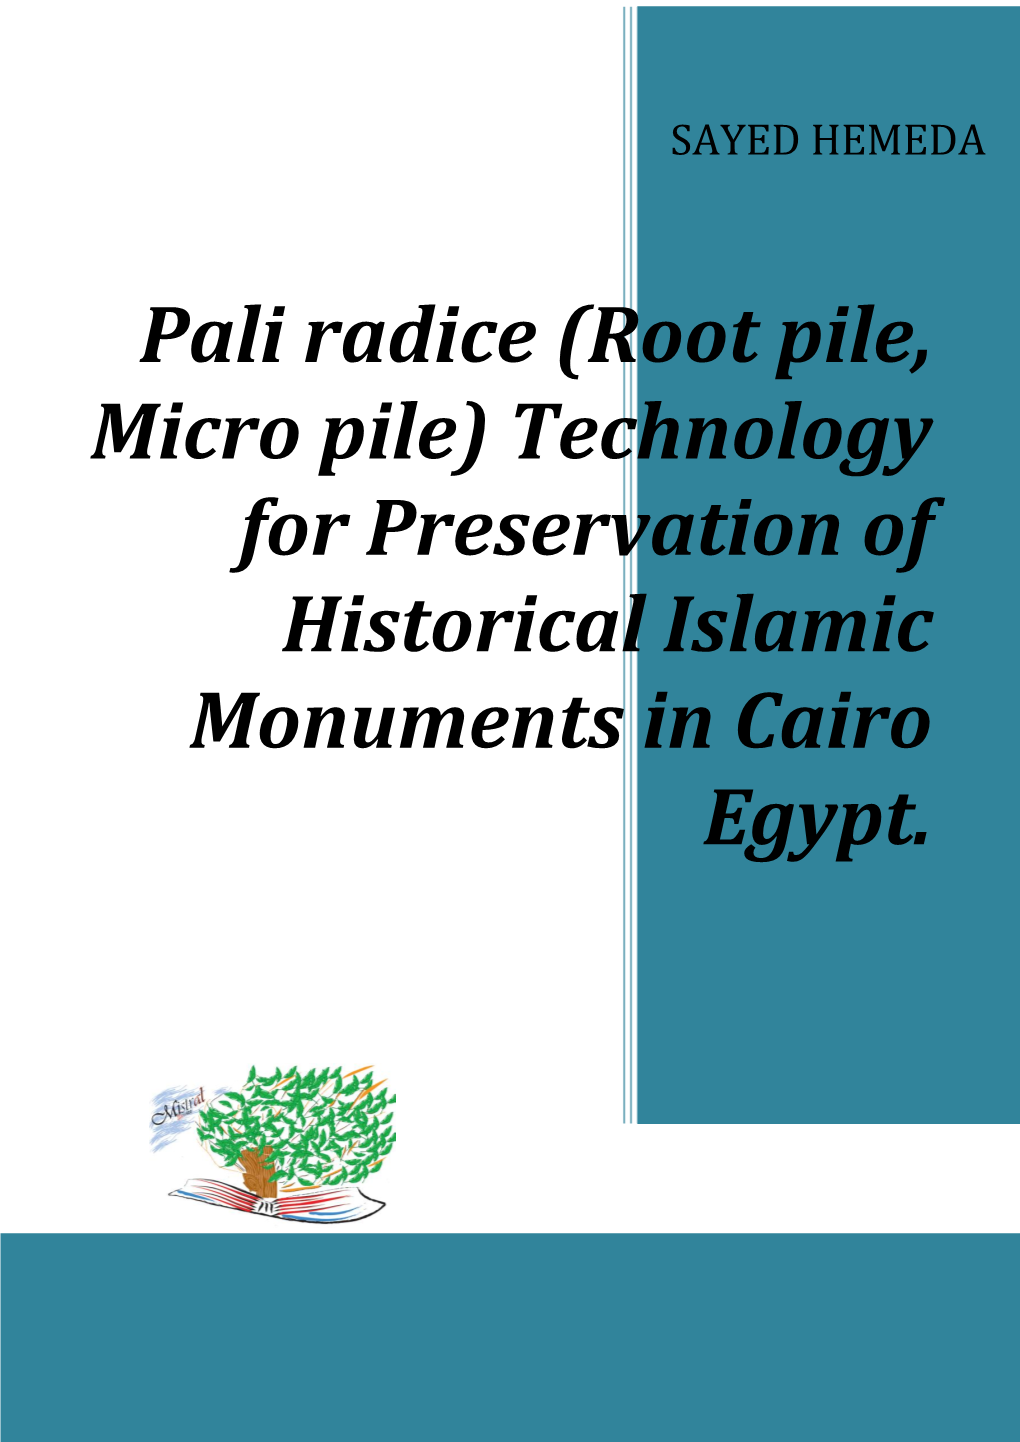 (Root Pile, Micro Pile) Technology for Preservation of Historical Islamic Monuments in Cairo Egypt